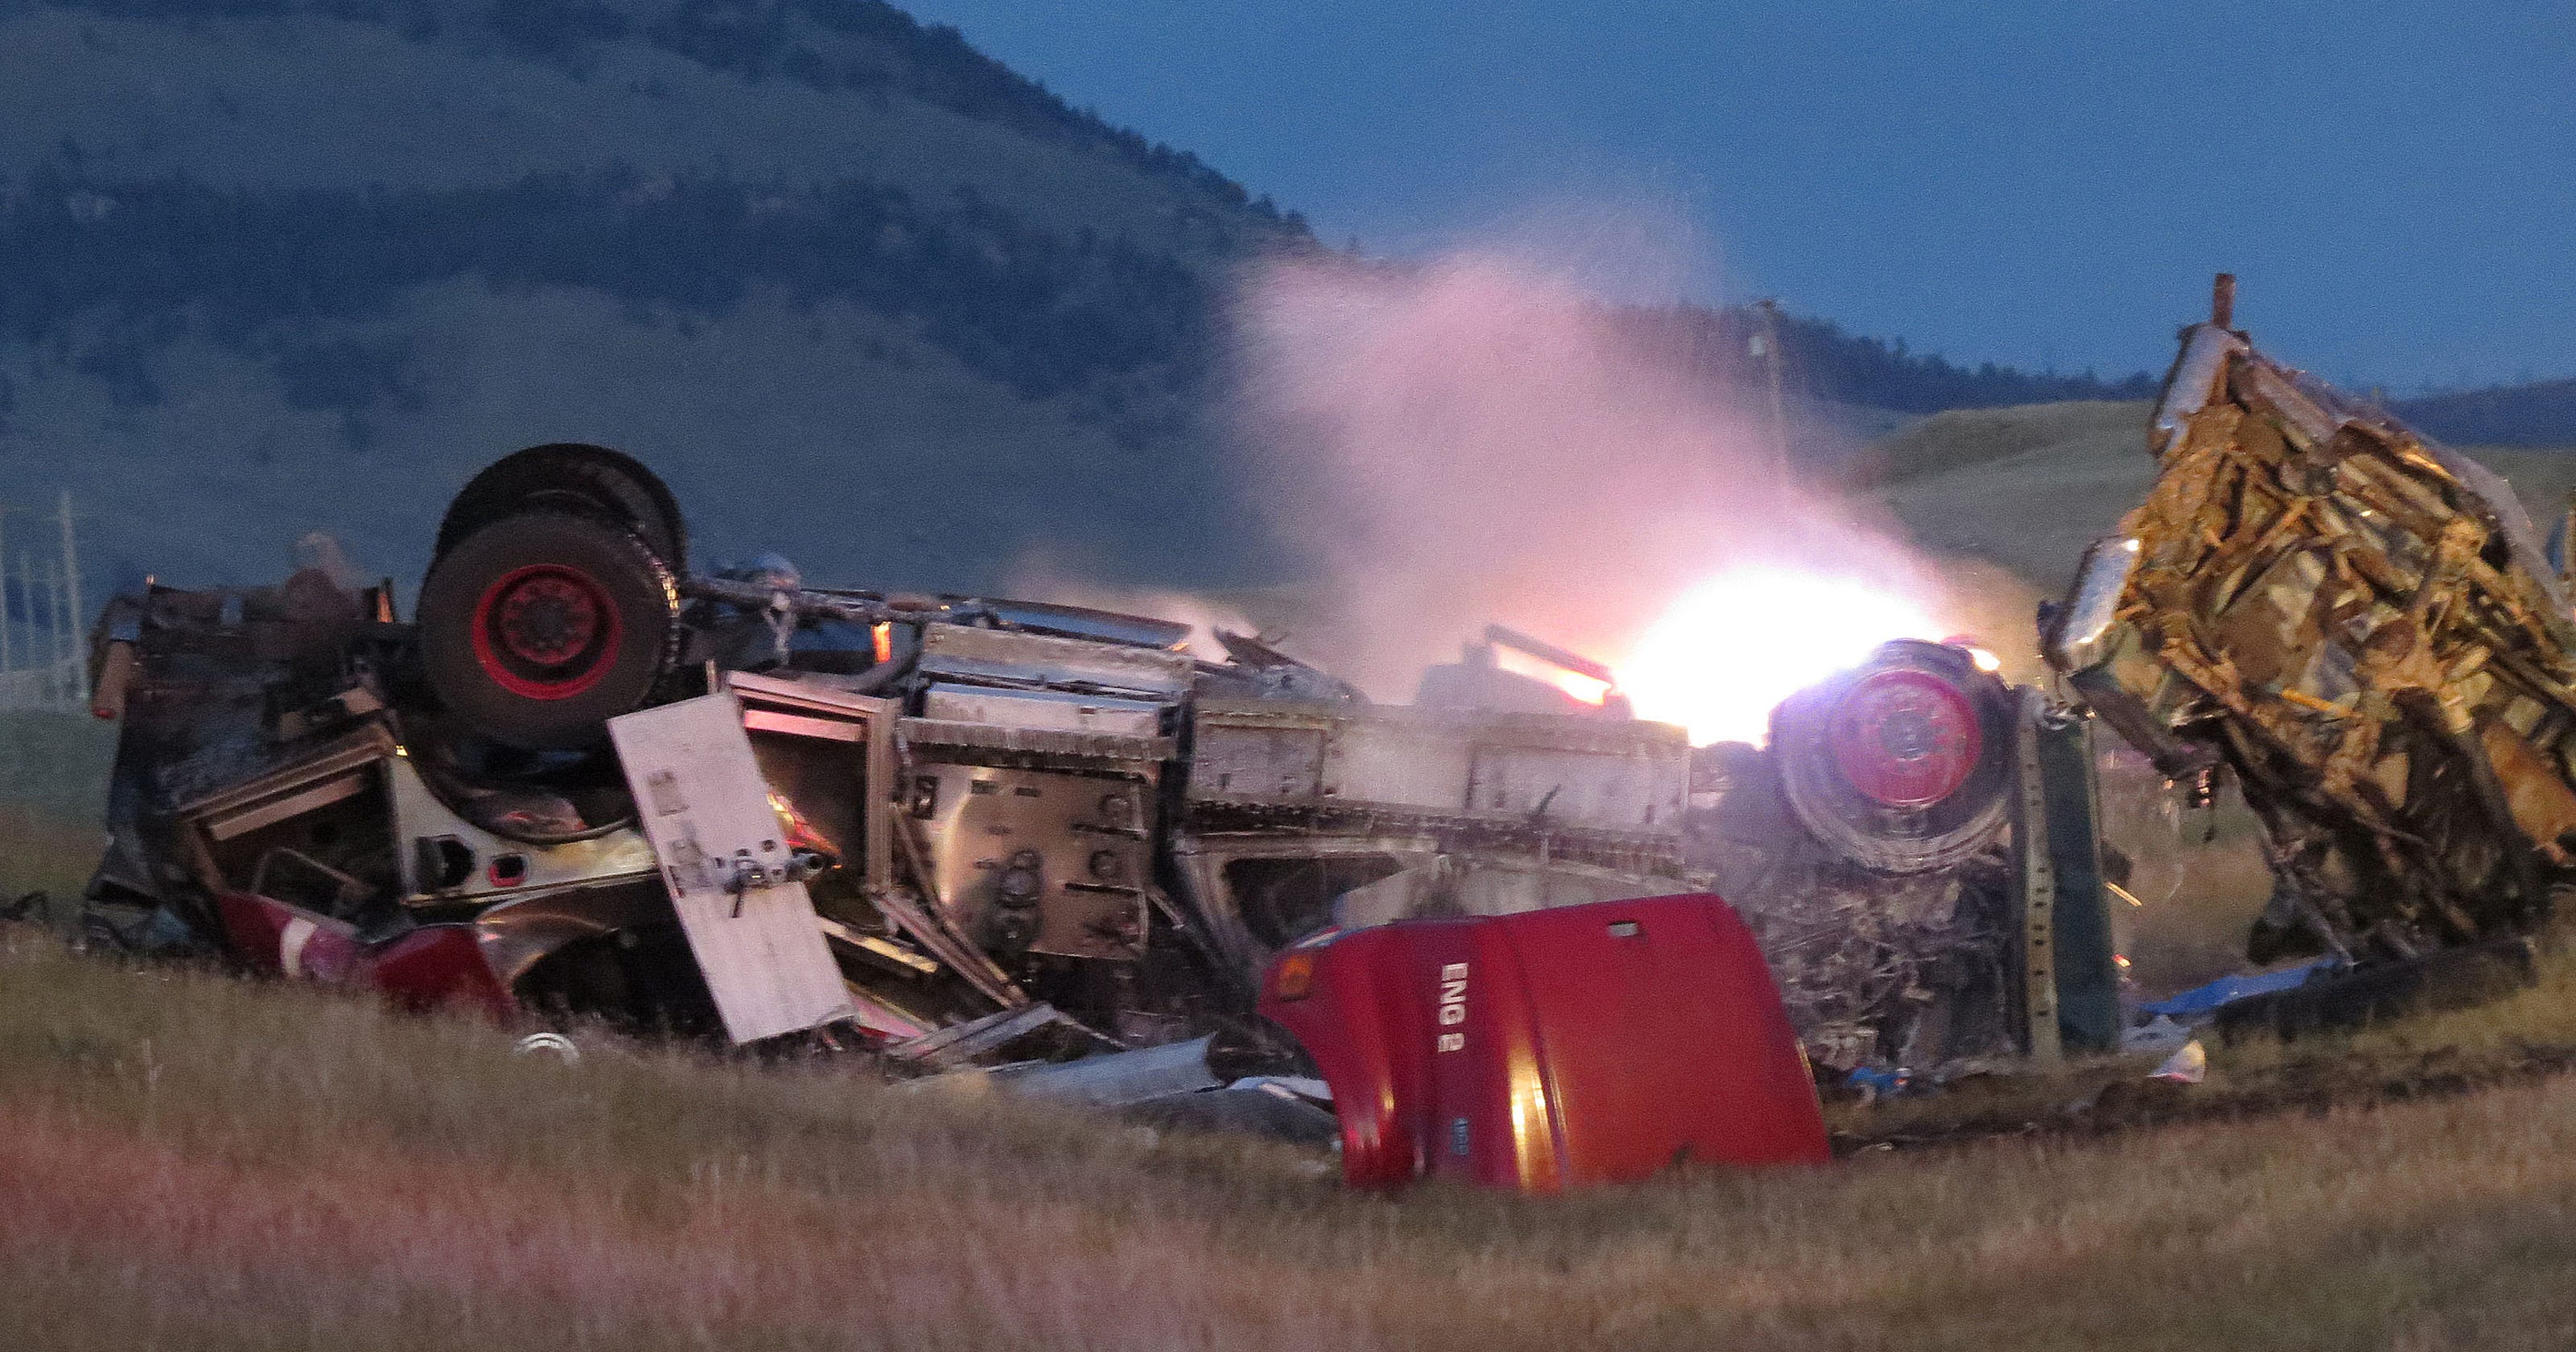 Findings in fatal Montana highway crash under review